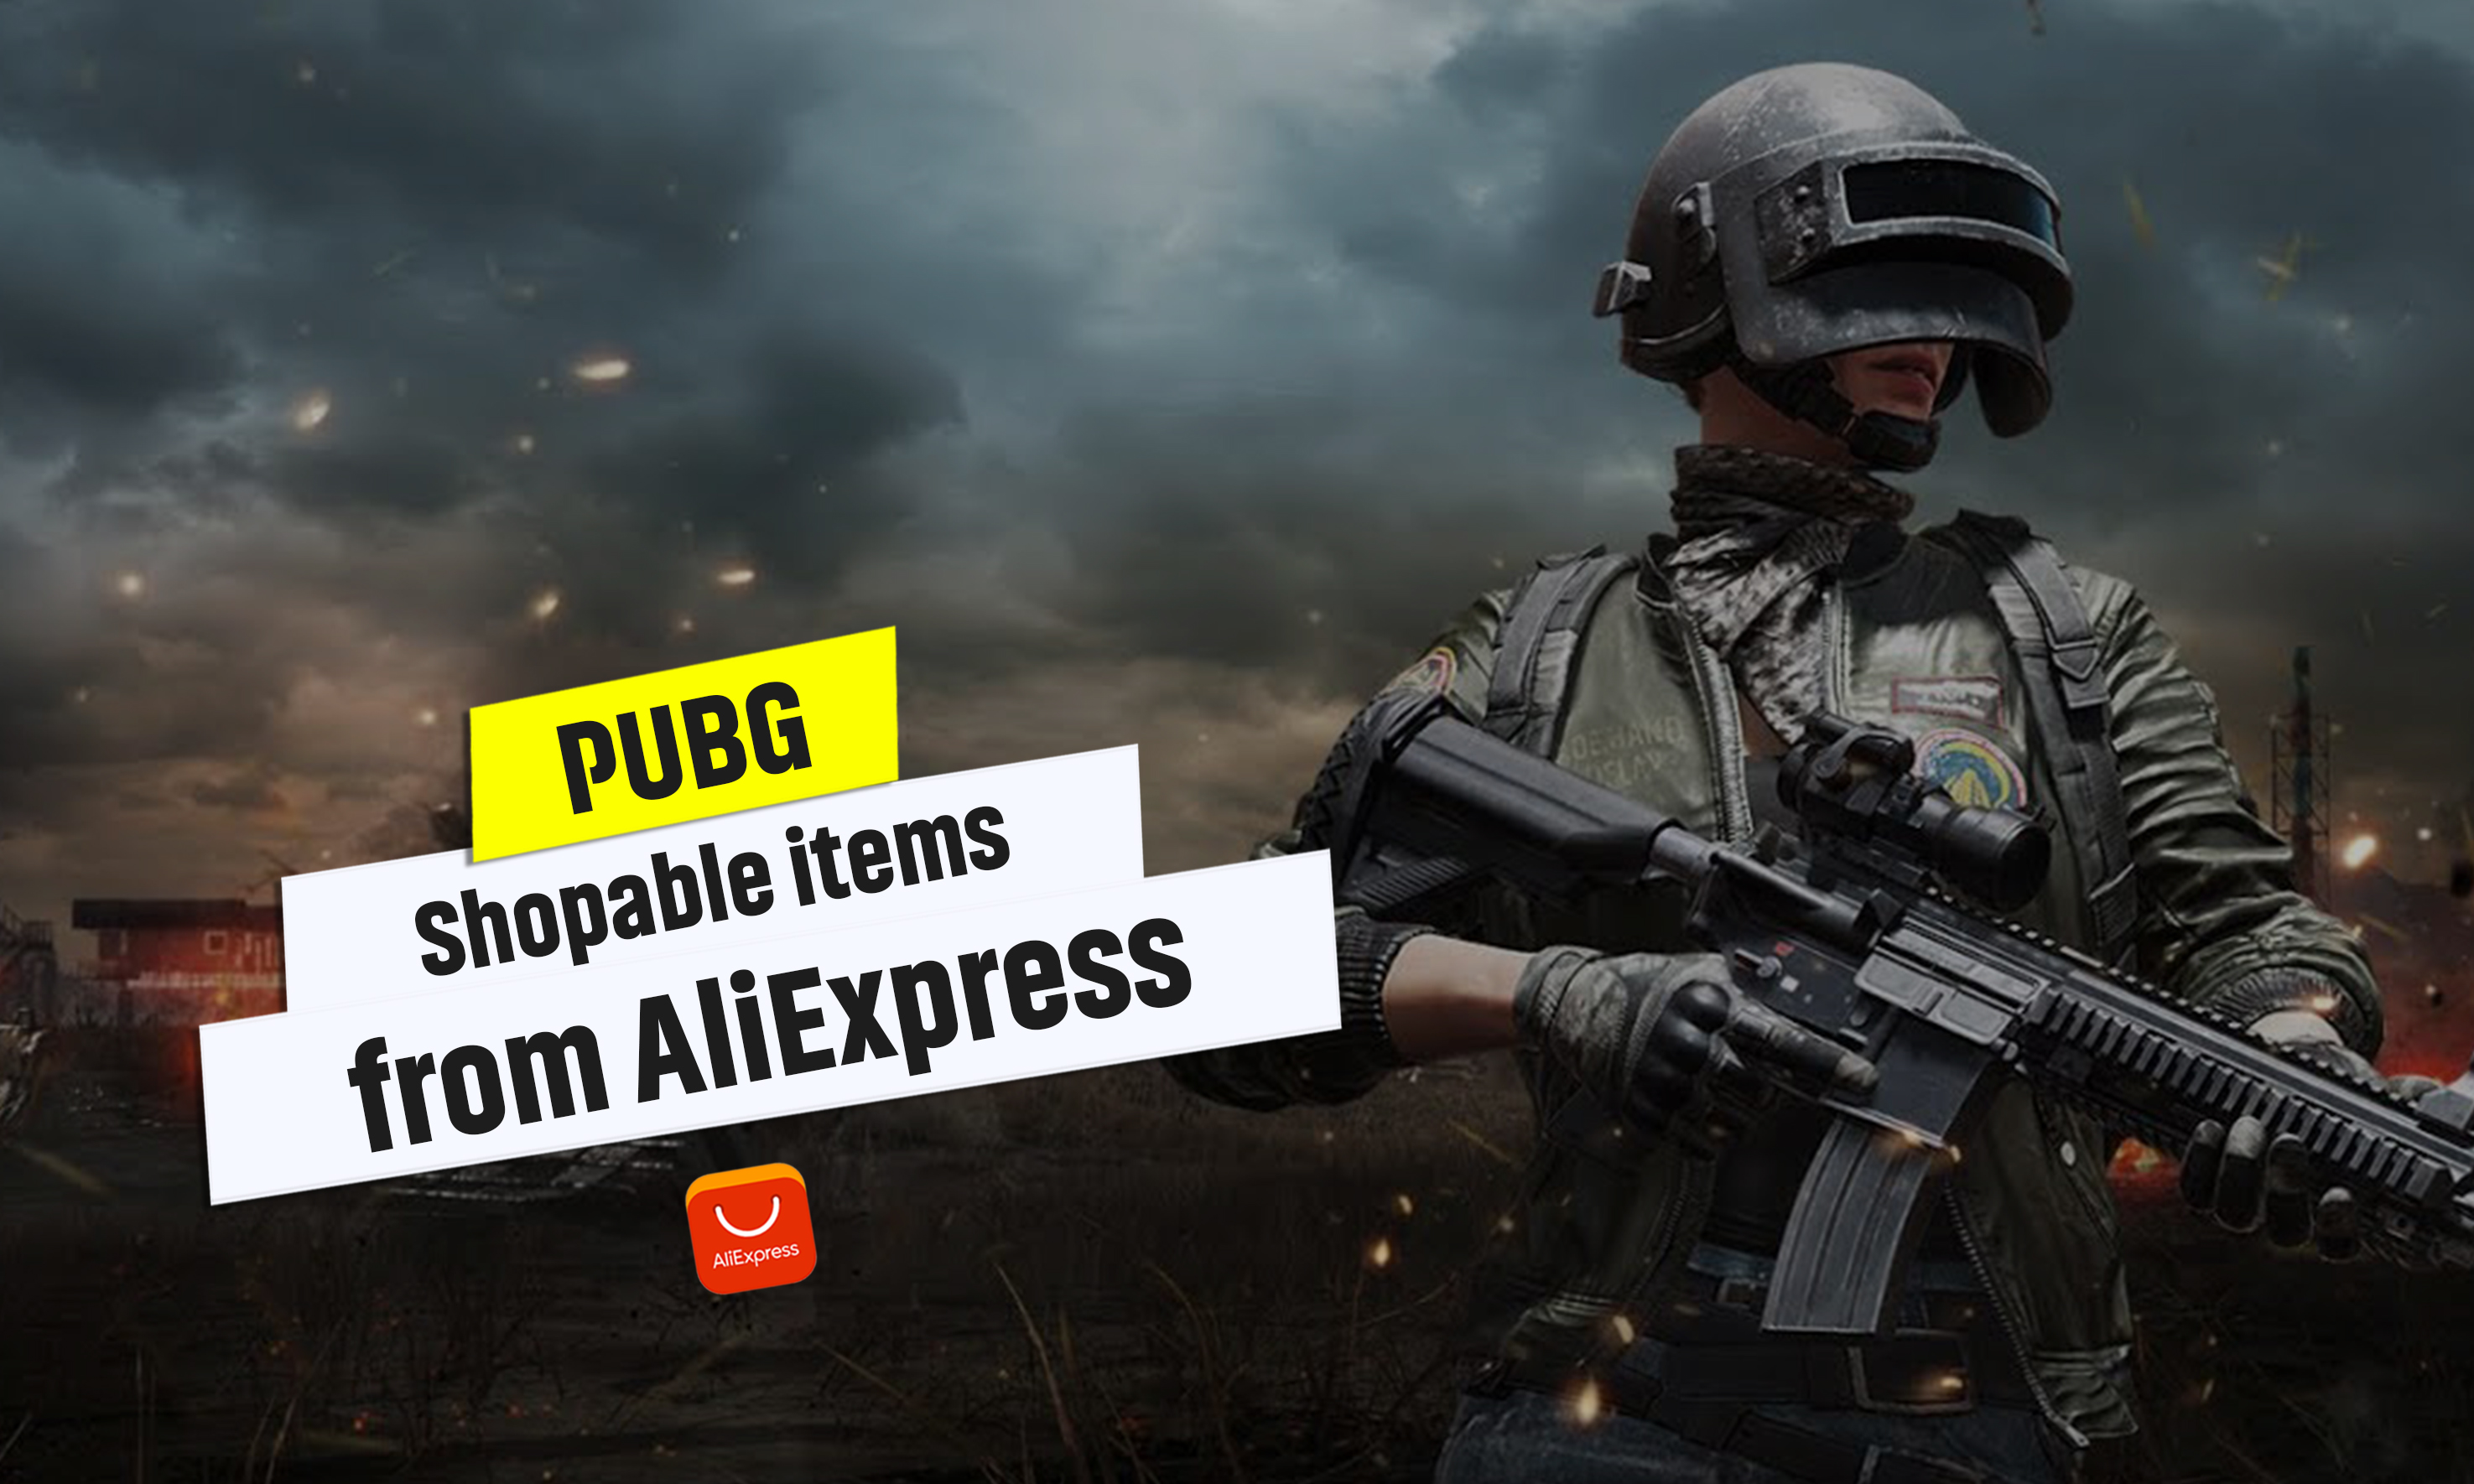 If you are a PUBG addict, you will love these shopable items from AliExpress